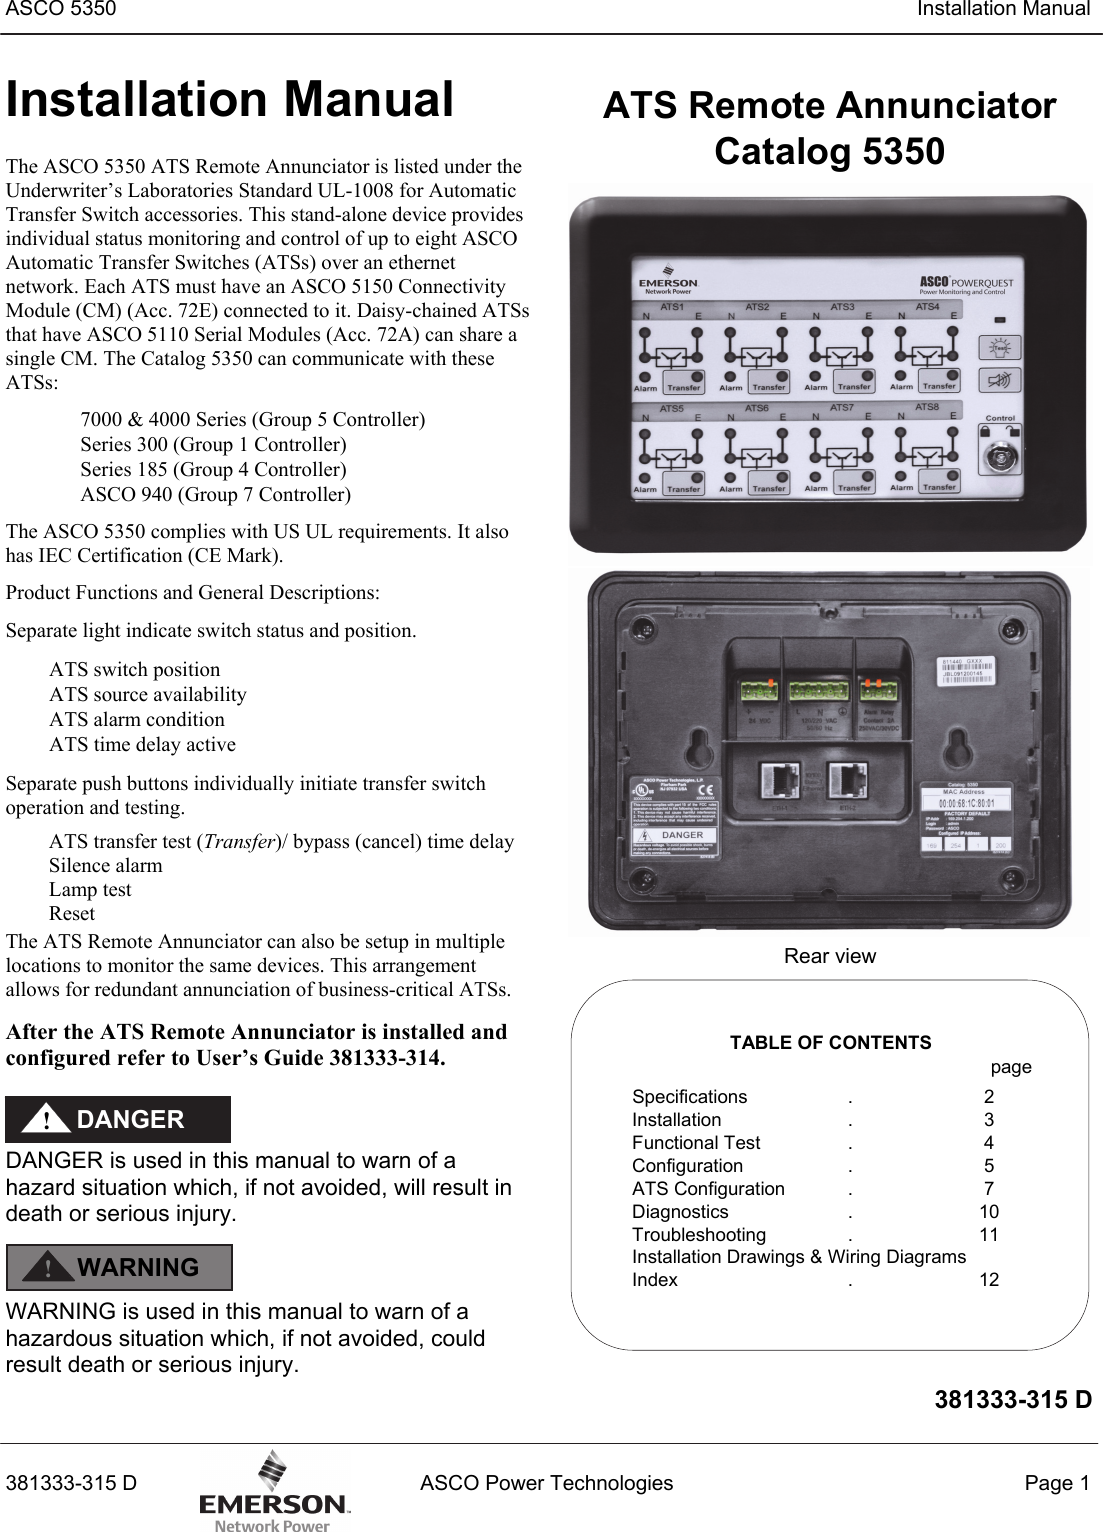 Page 1 of 12 - Emerson Emerson-Asco-5350-Eight-Channel-Remote-Annunciator-Installation-Manual- Installation Manual 381333-315 For ASCO Catalog 5350 ATS Remote Annunciator 2009-  Emerson-asco-5350-eight-channel-remote-annunciator-installation-manual